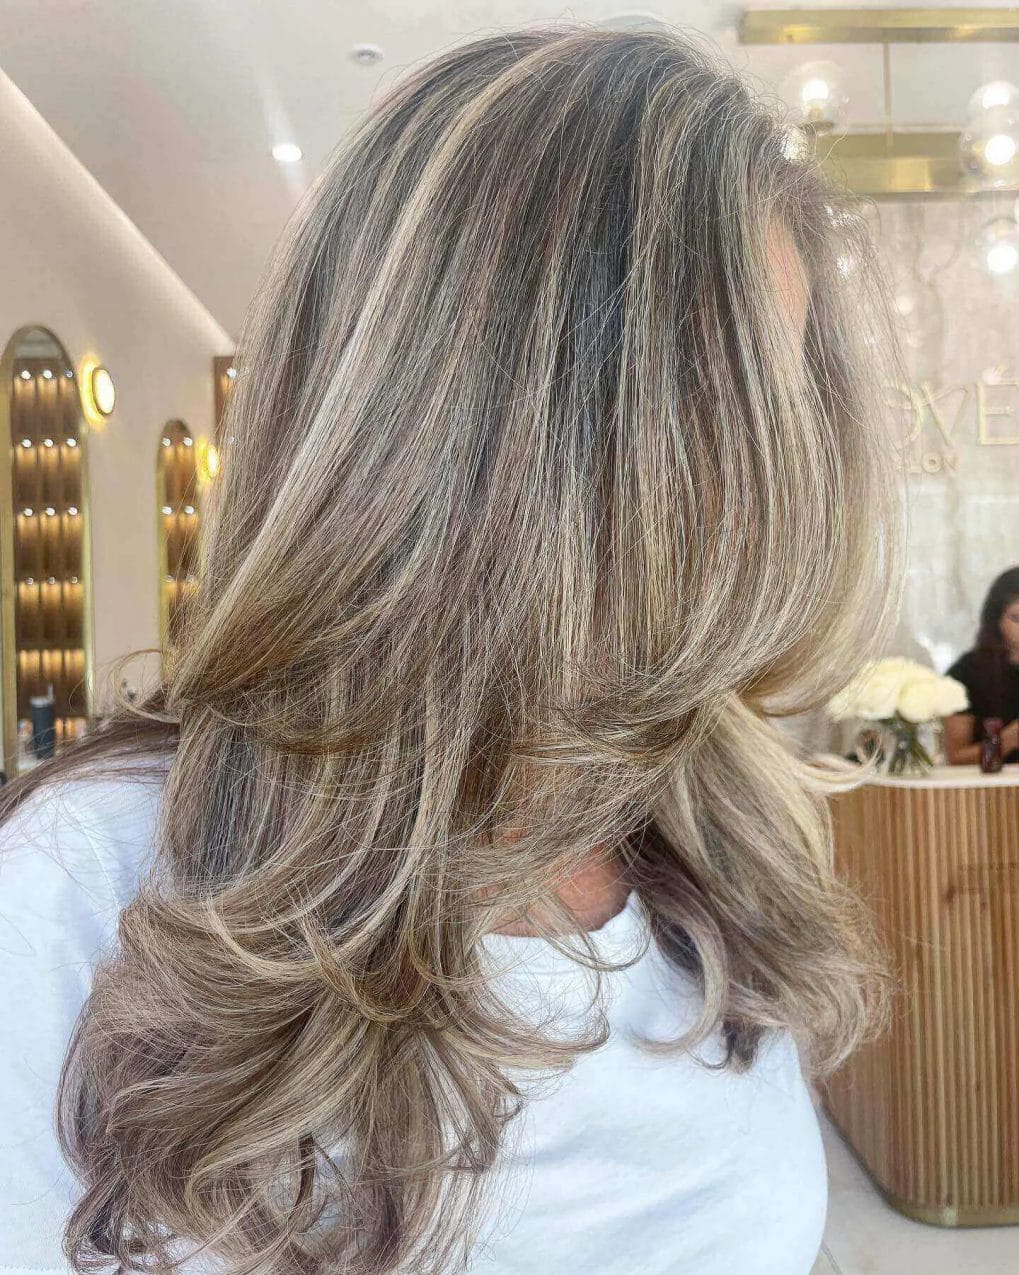 Long, layered blend of dimensional blondes and natural gray.